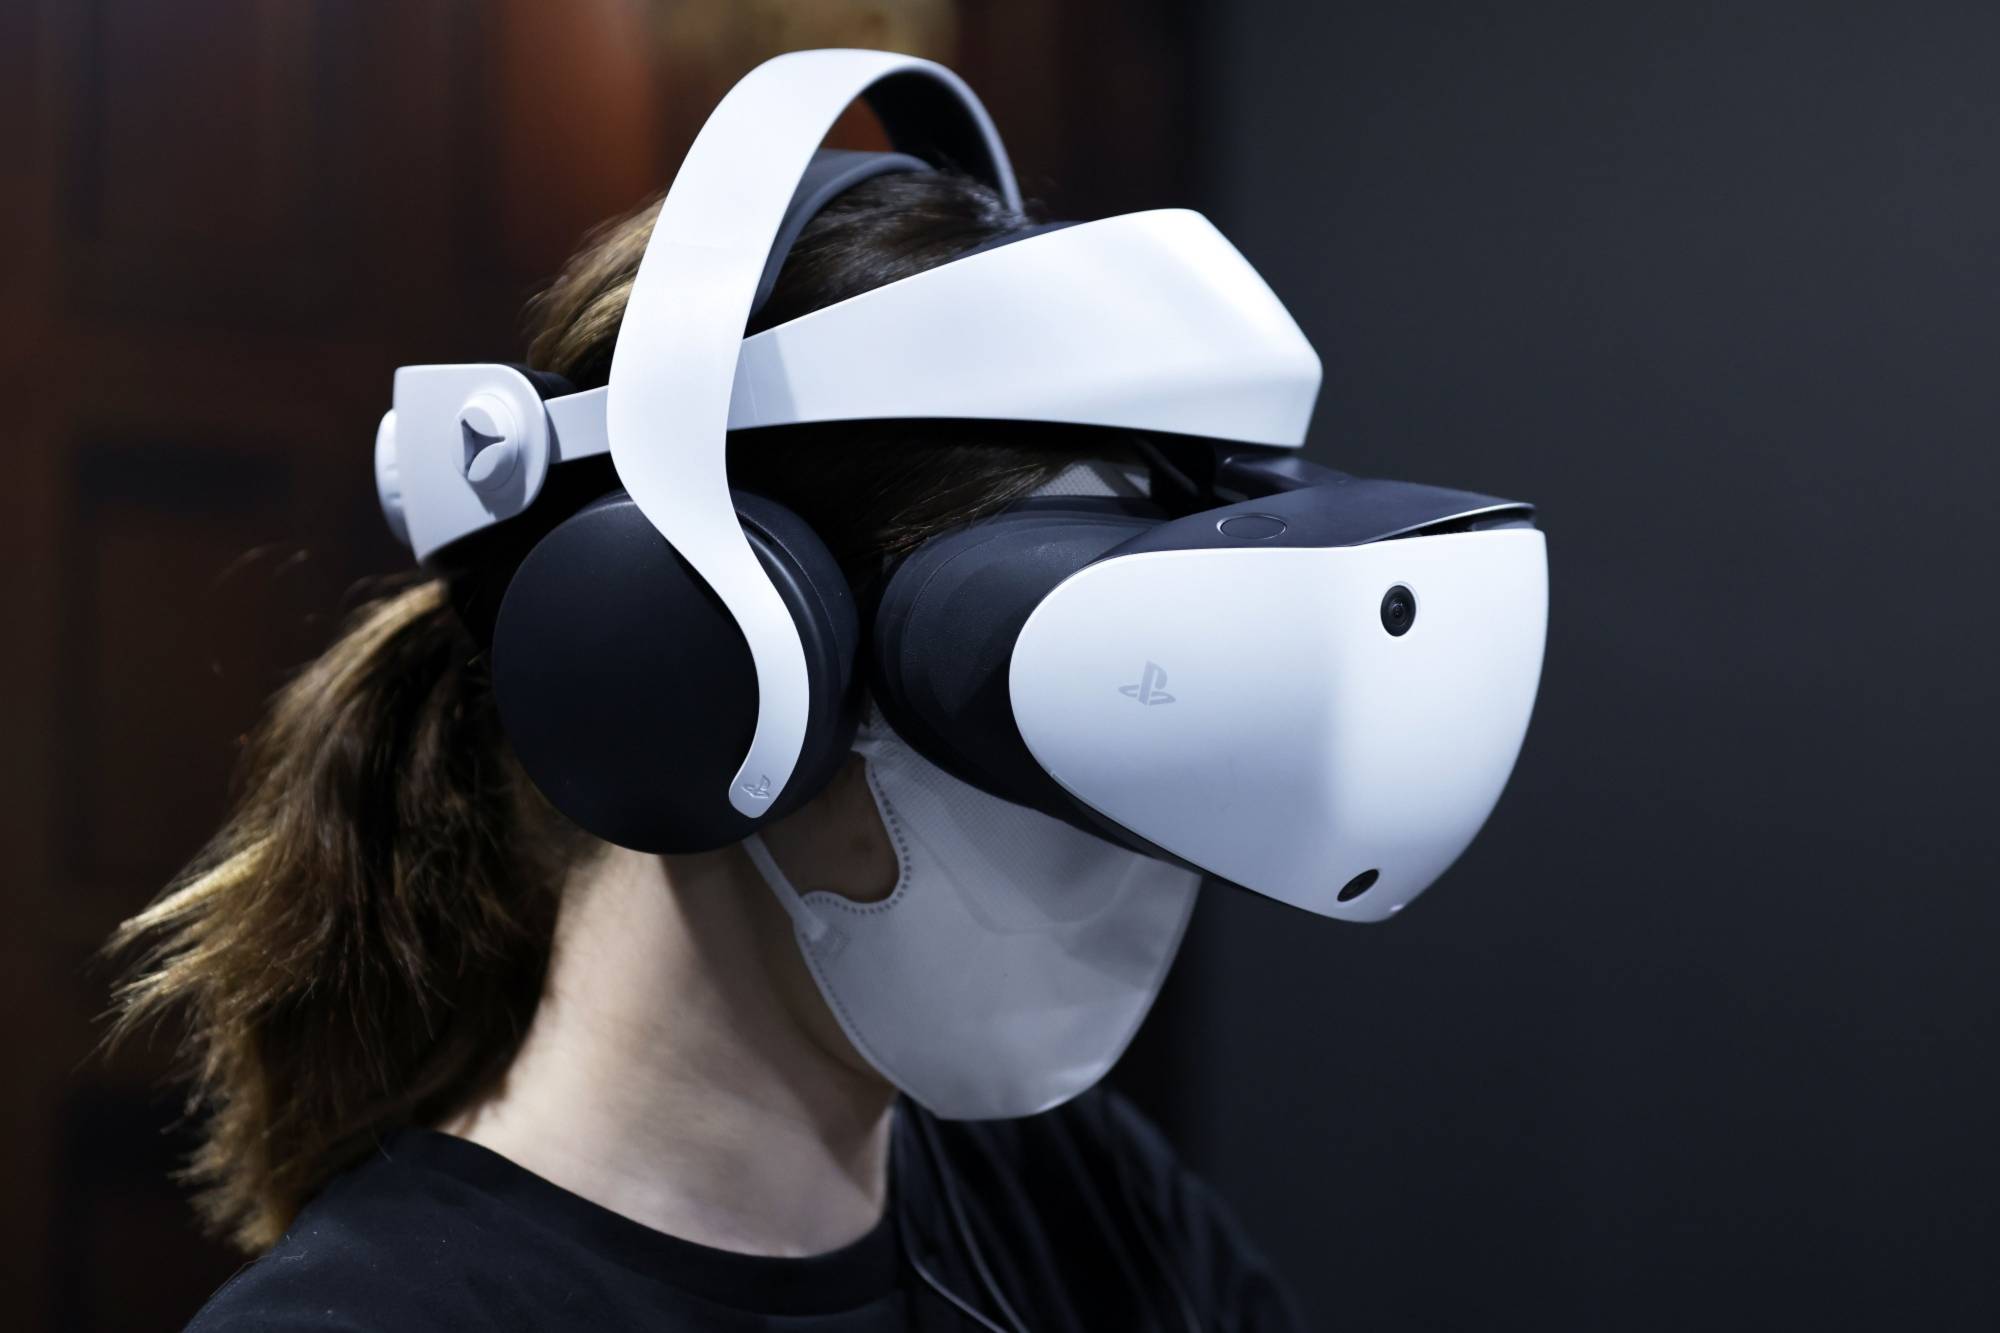 betting big on VR headset with production plan - The Times